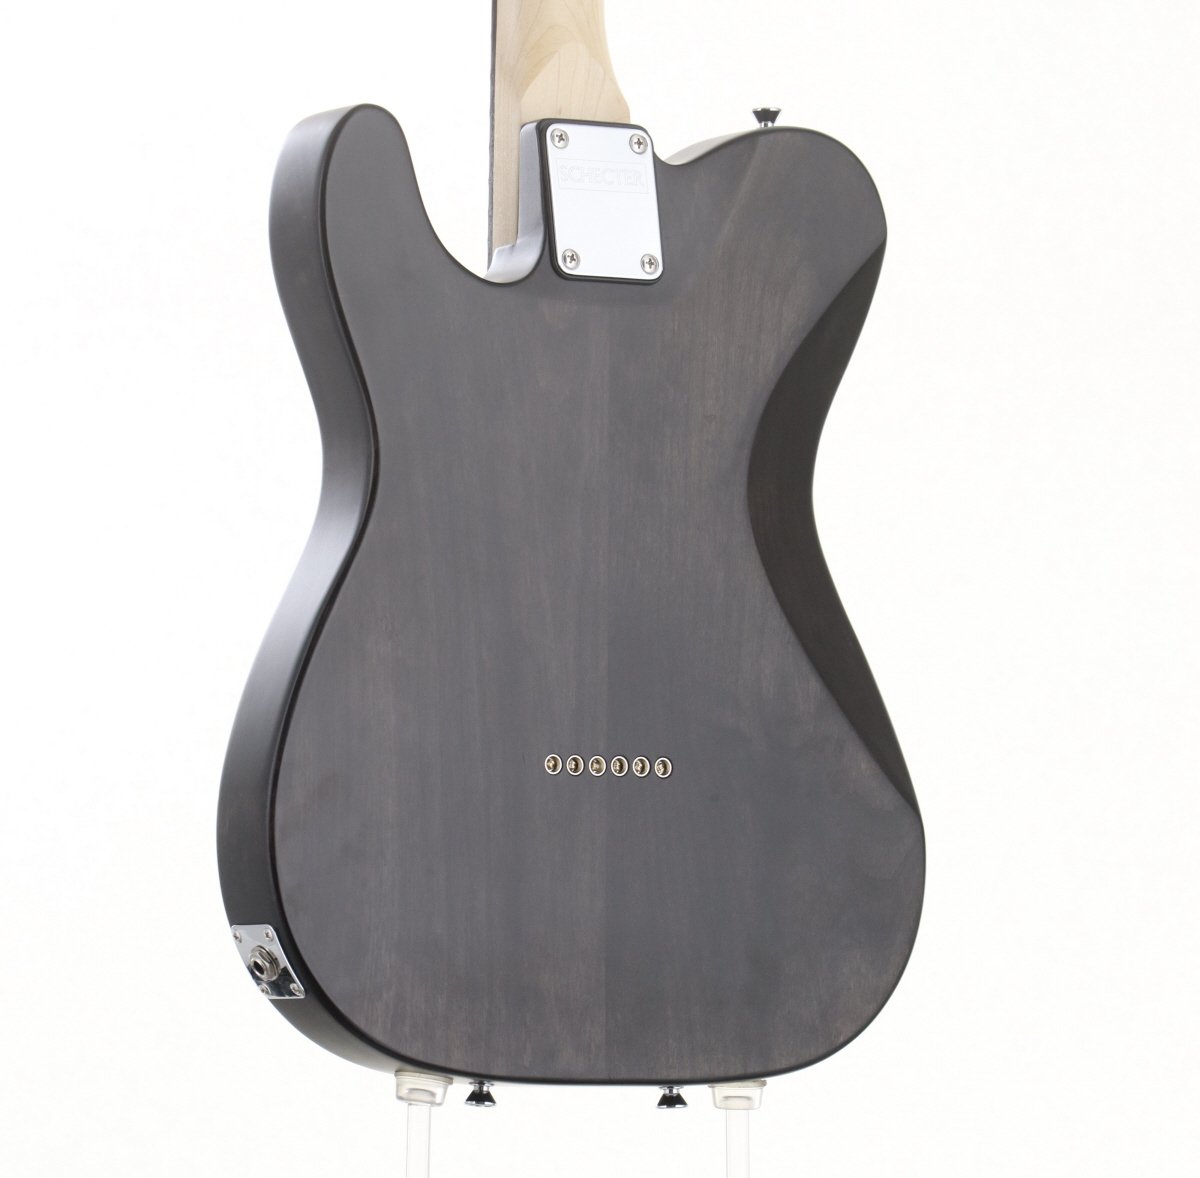 [SN S2206370] USED SCHECTER / PS-S-PT-AL CBT R [10]